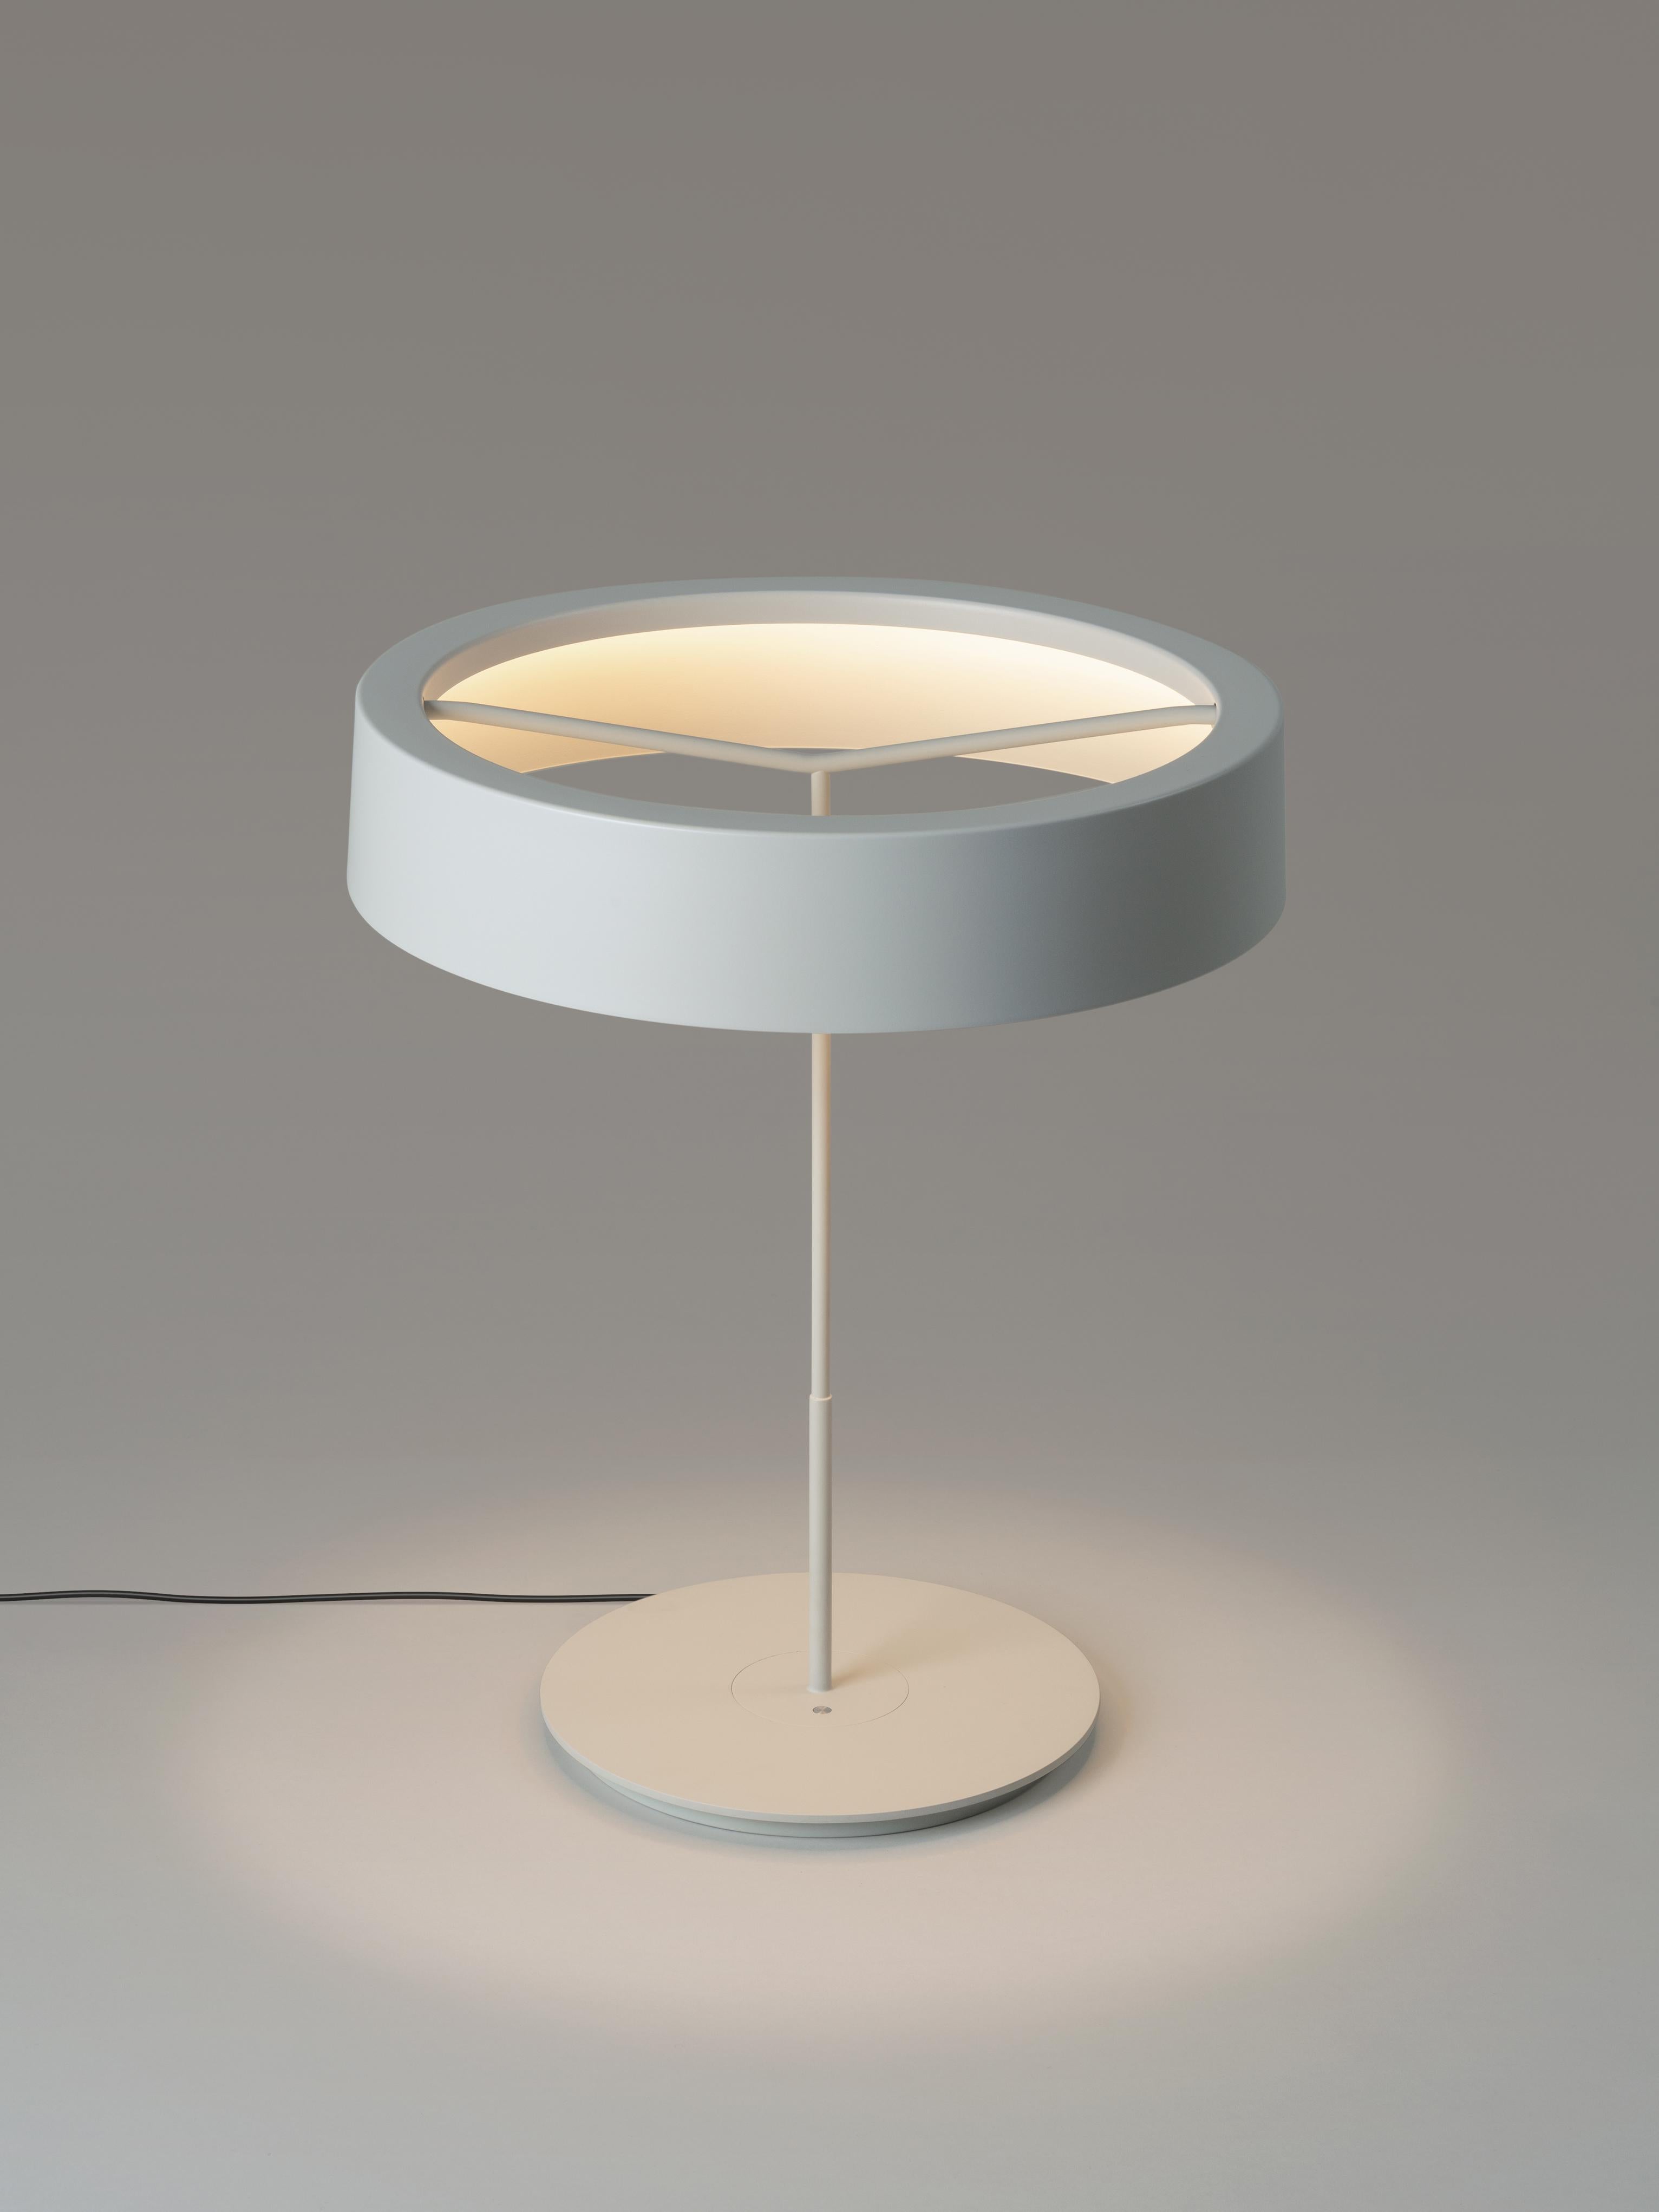 Large white sin table lamp with shade II by Antoni Arola
Dimensions: D 48 x H 58 cm.
Materials: Metal.
Lampshade: White S&C aluminium.
Available in white or graphite, with or without shade.

A lamp that combines simplicity and technology to